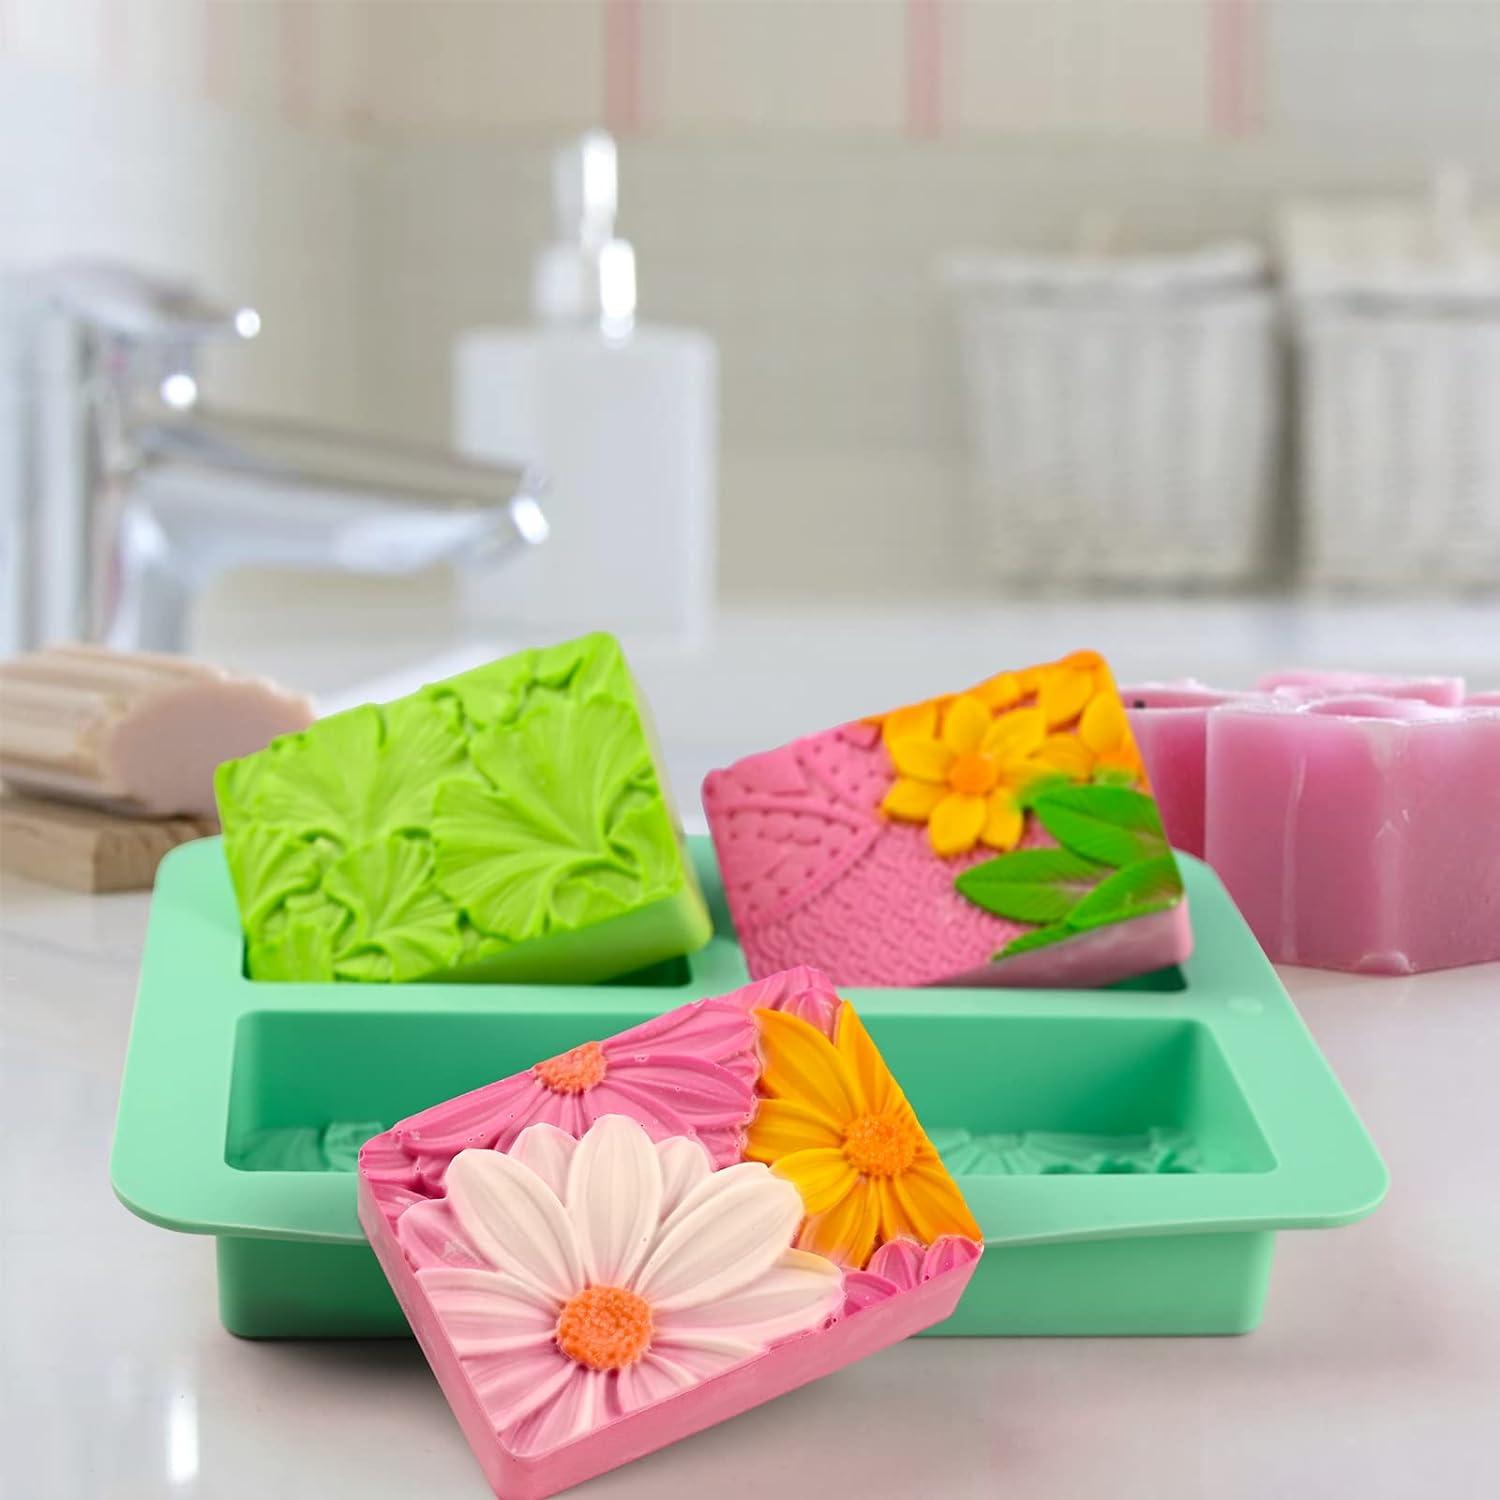 Handmade Soap Mold - Square Leaf Shaped Silicone Soap Molds for